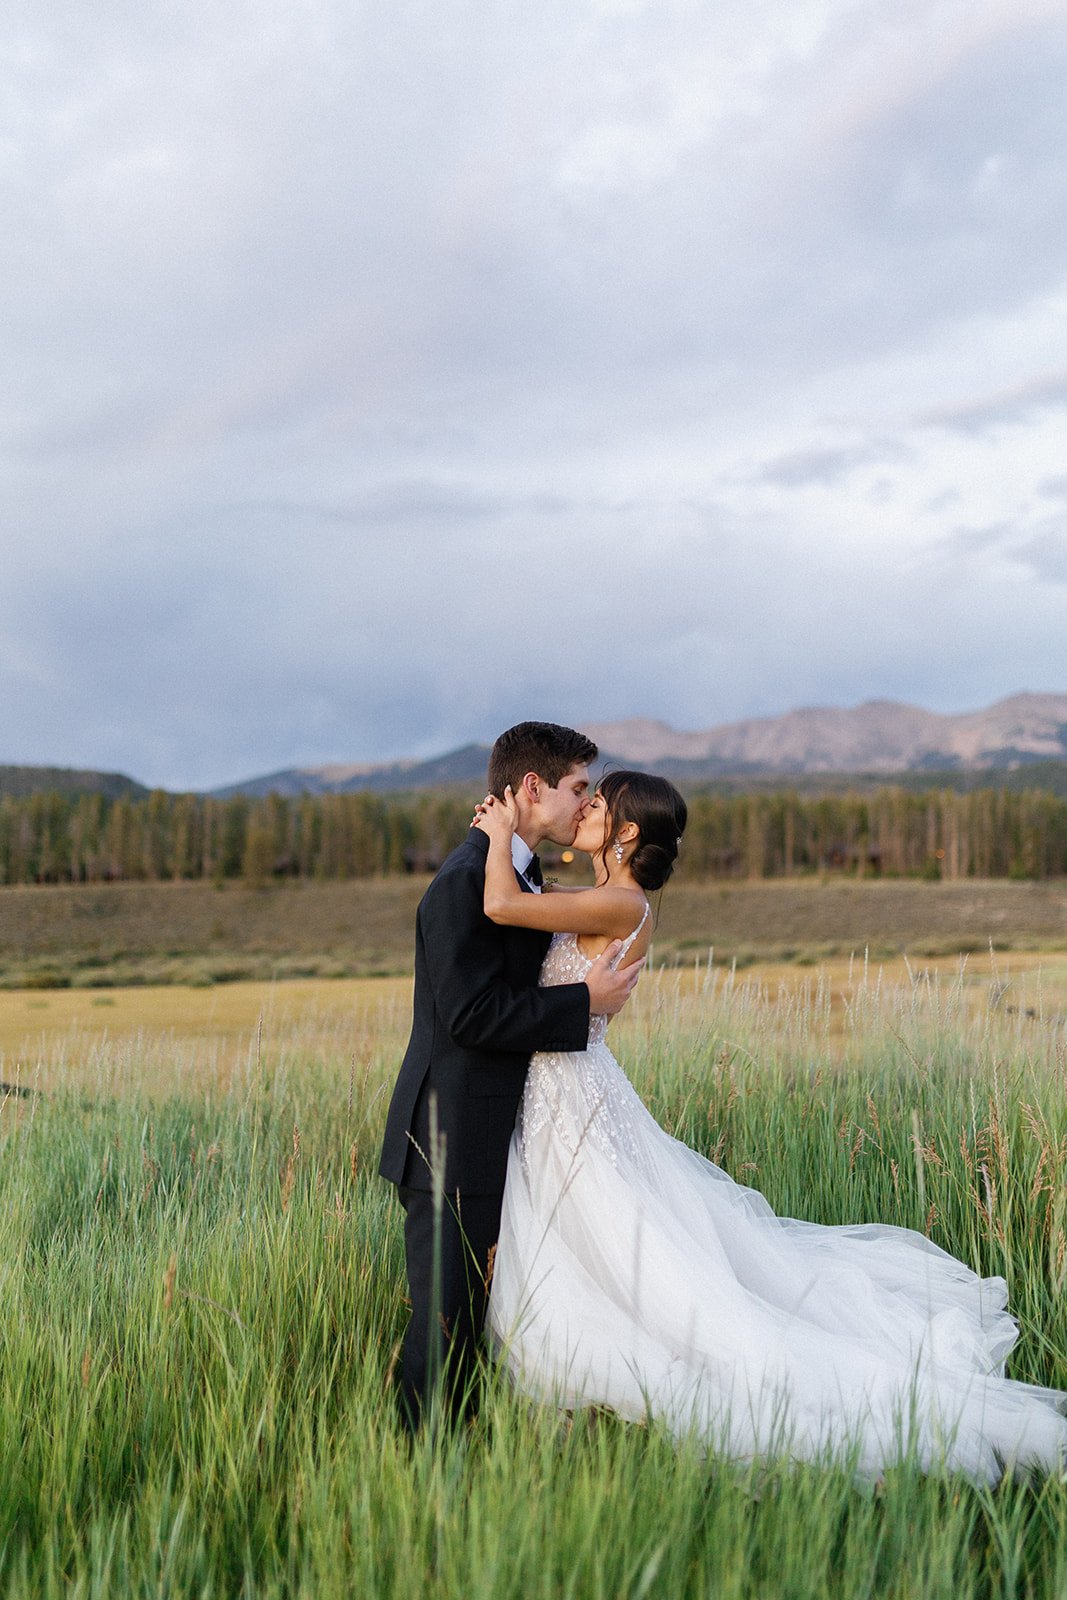  Liz Martinez Liz Martinez bridal Liz Martinez Indigo tulle aline wedding gown beaded wedding gown Devils thumb ranch Colorado weddings  